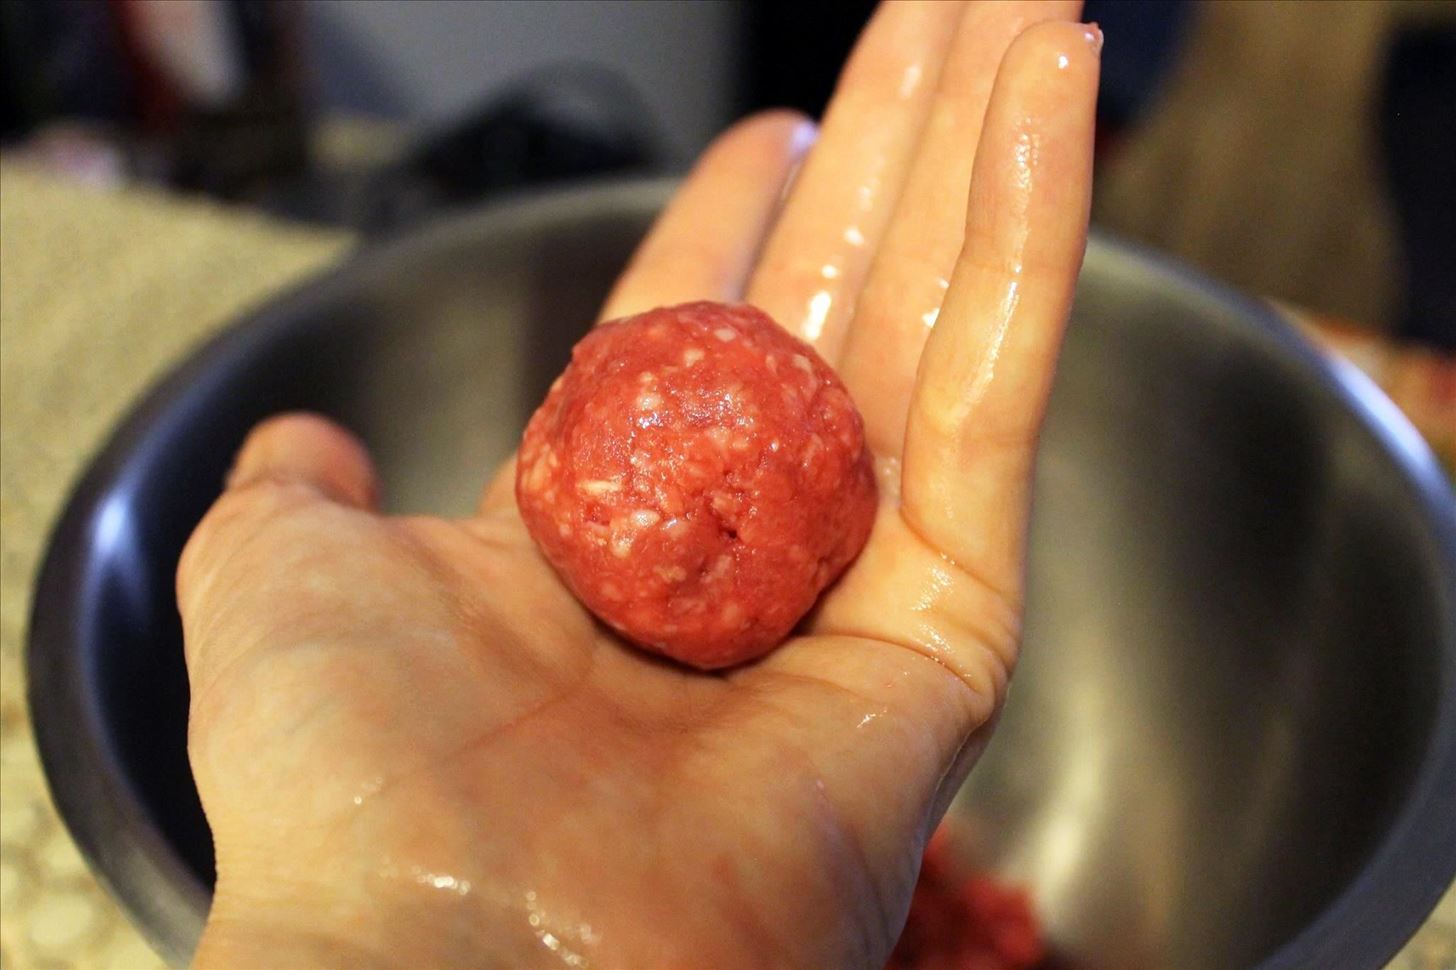 How to Keep Ground Meat from Sticking to Your Hands